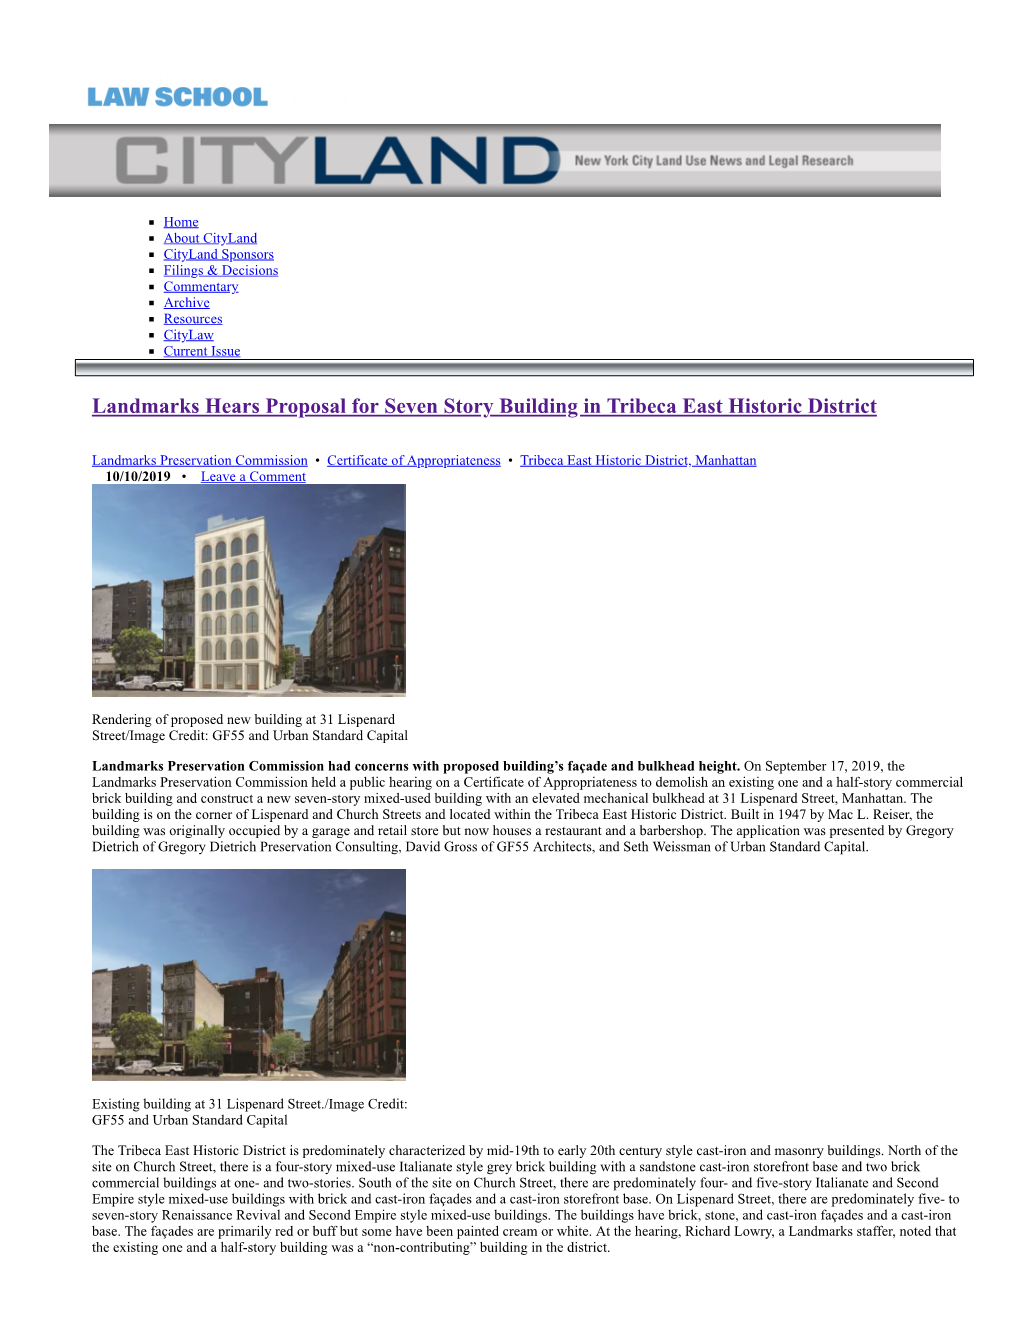 Landmarks Hears Proposal for Seven Story Building in Tribeca East Historic District